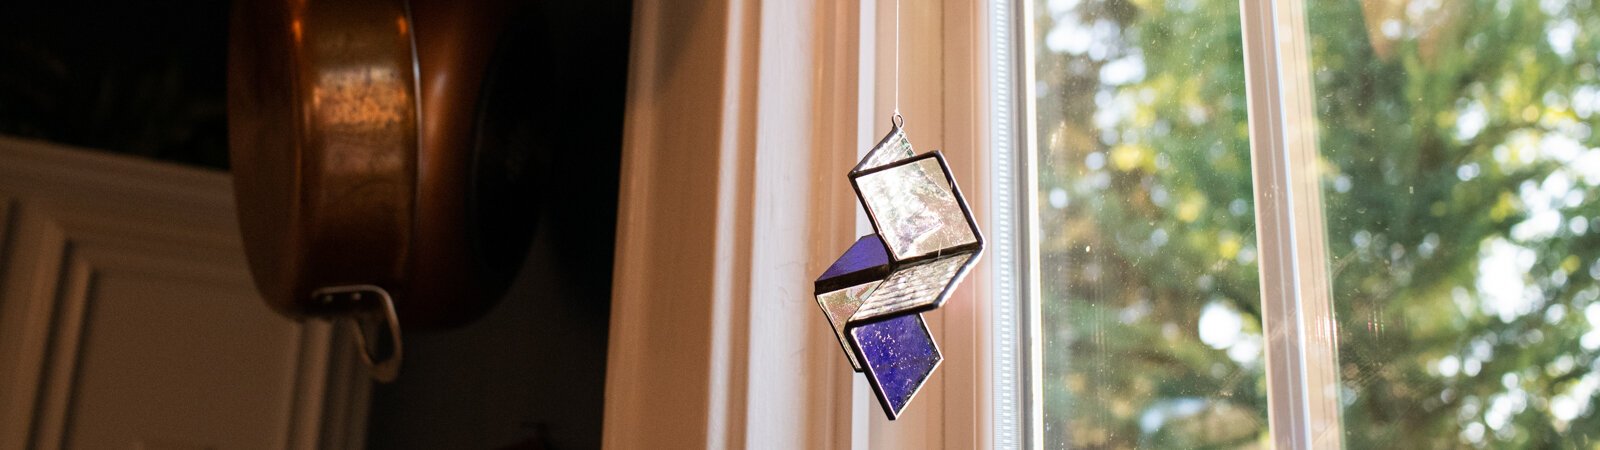 A stained-glass suncatcher made by Kevin Christon of Fort Wayne hangs from the kitchen window in his home.